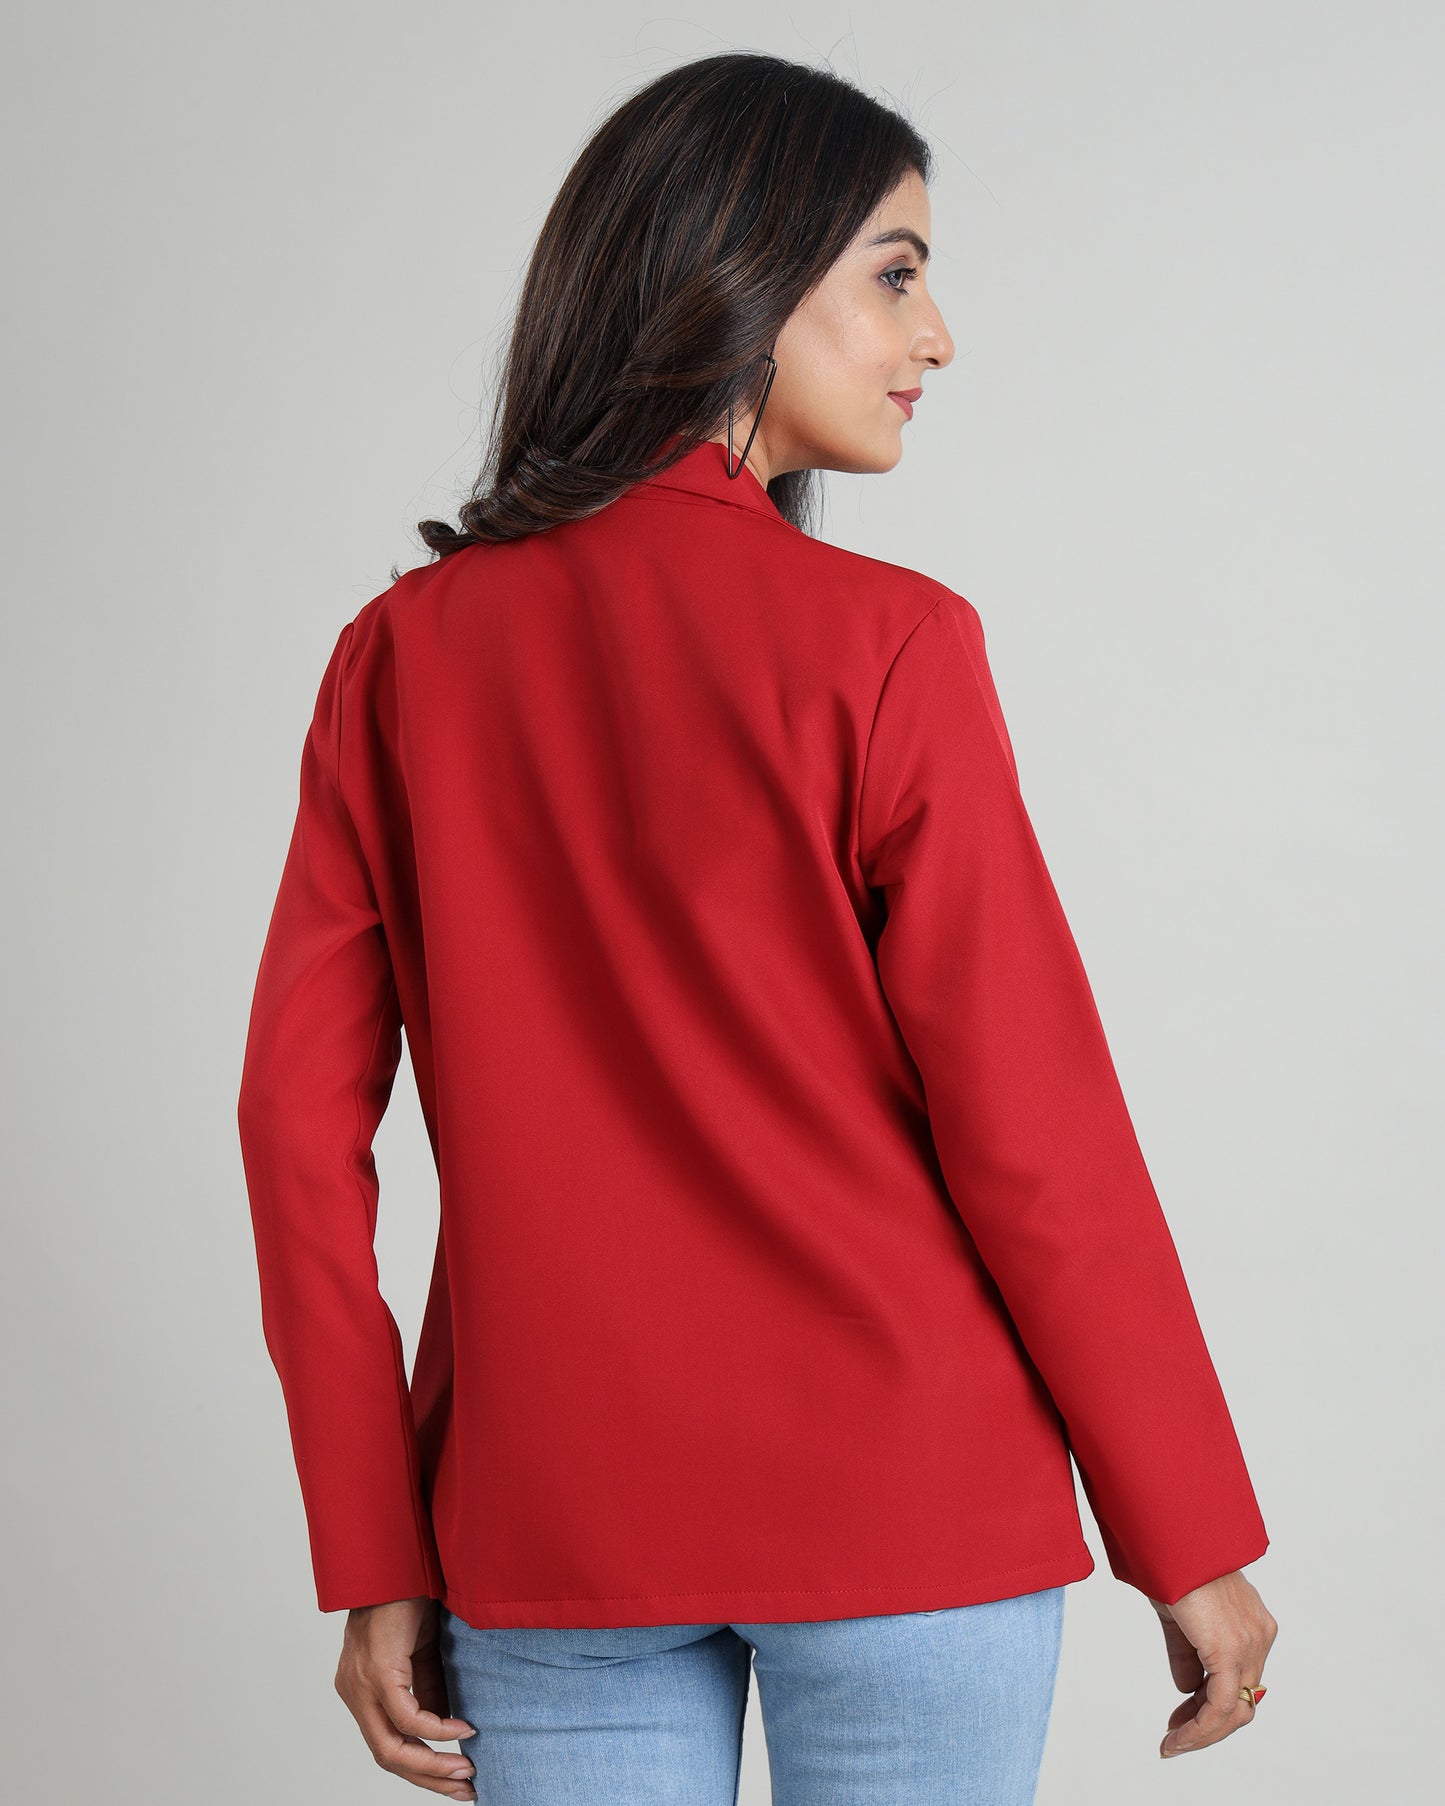 The Red Edit: A Simple Jacket for a Standout Look